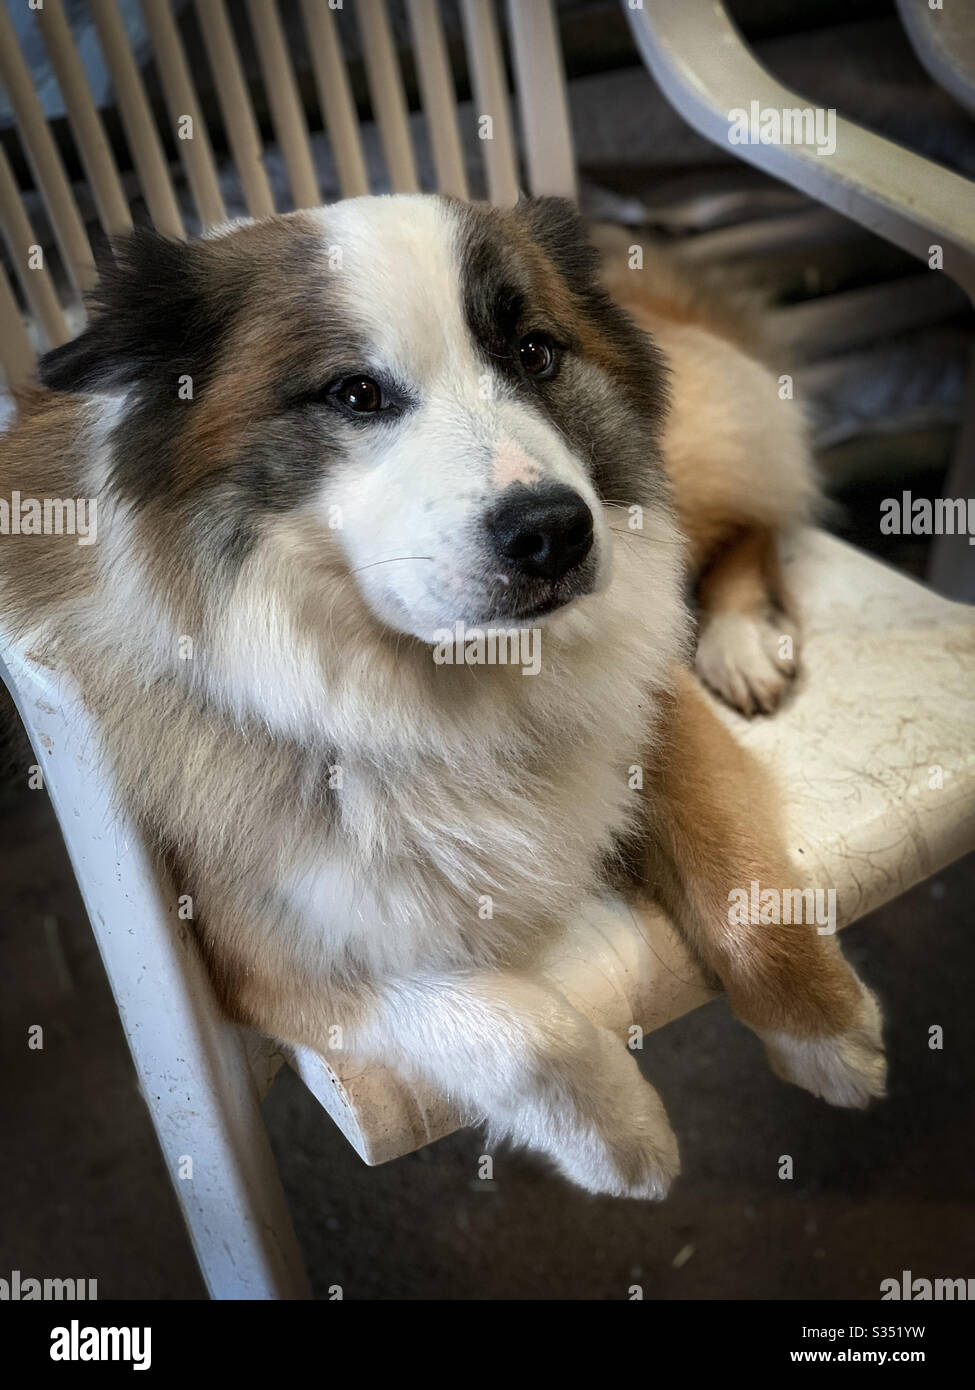 An Icelandic sheepdog lounging in a chair Stock Photo